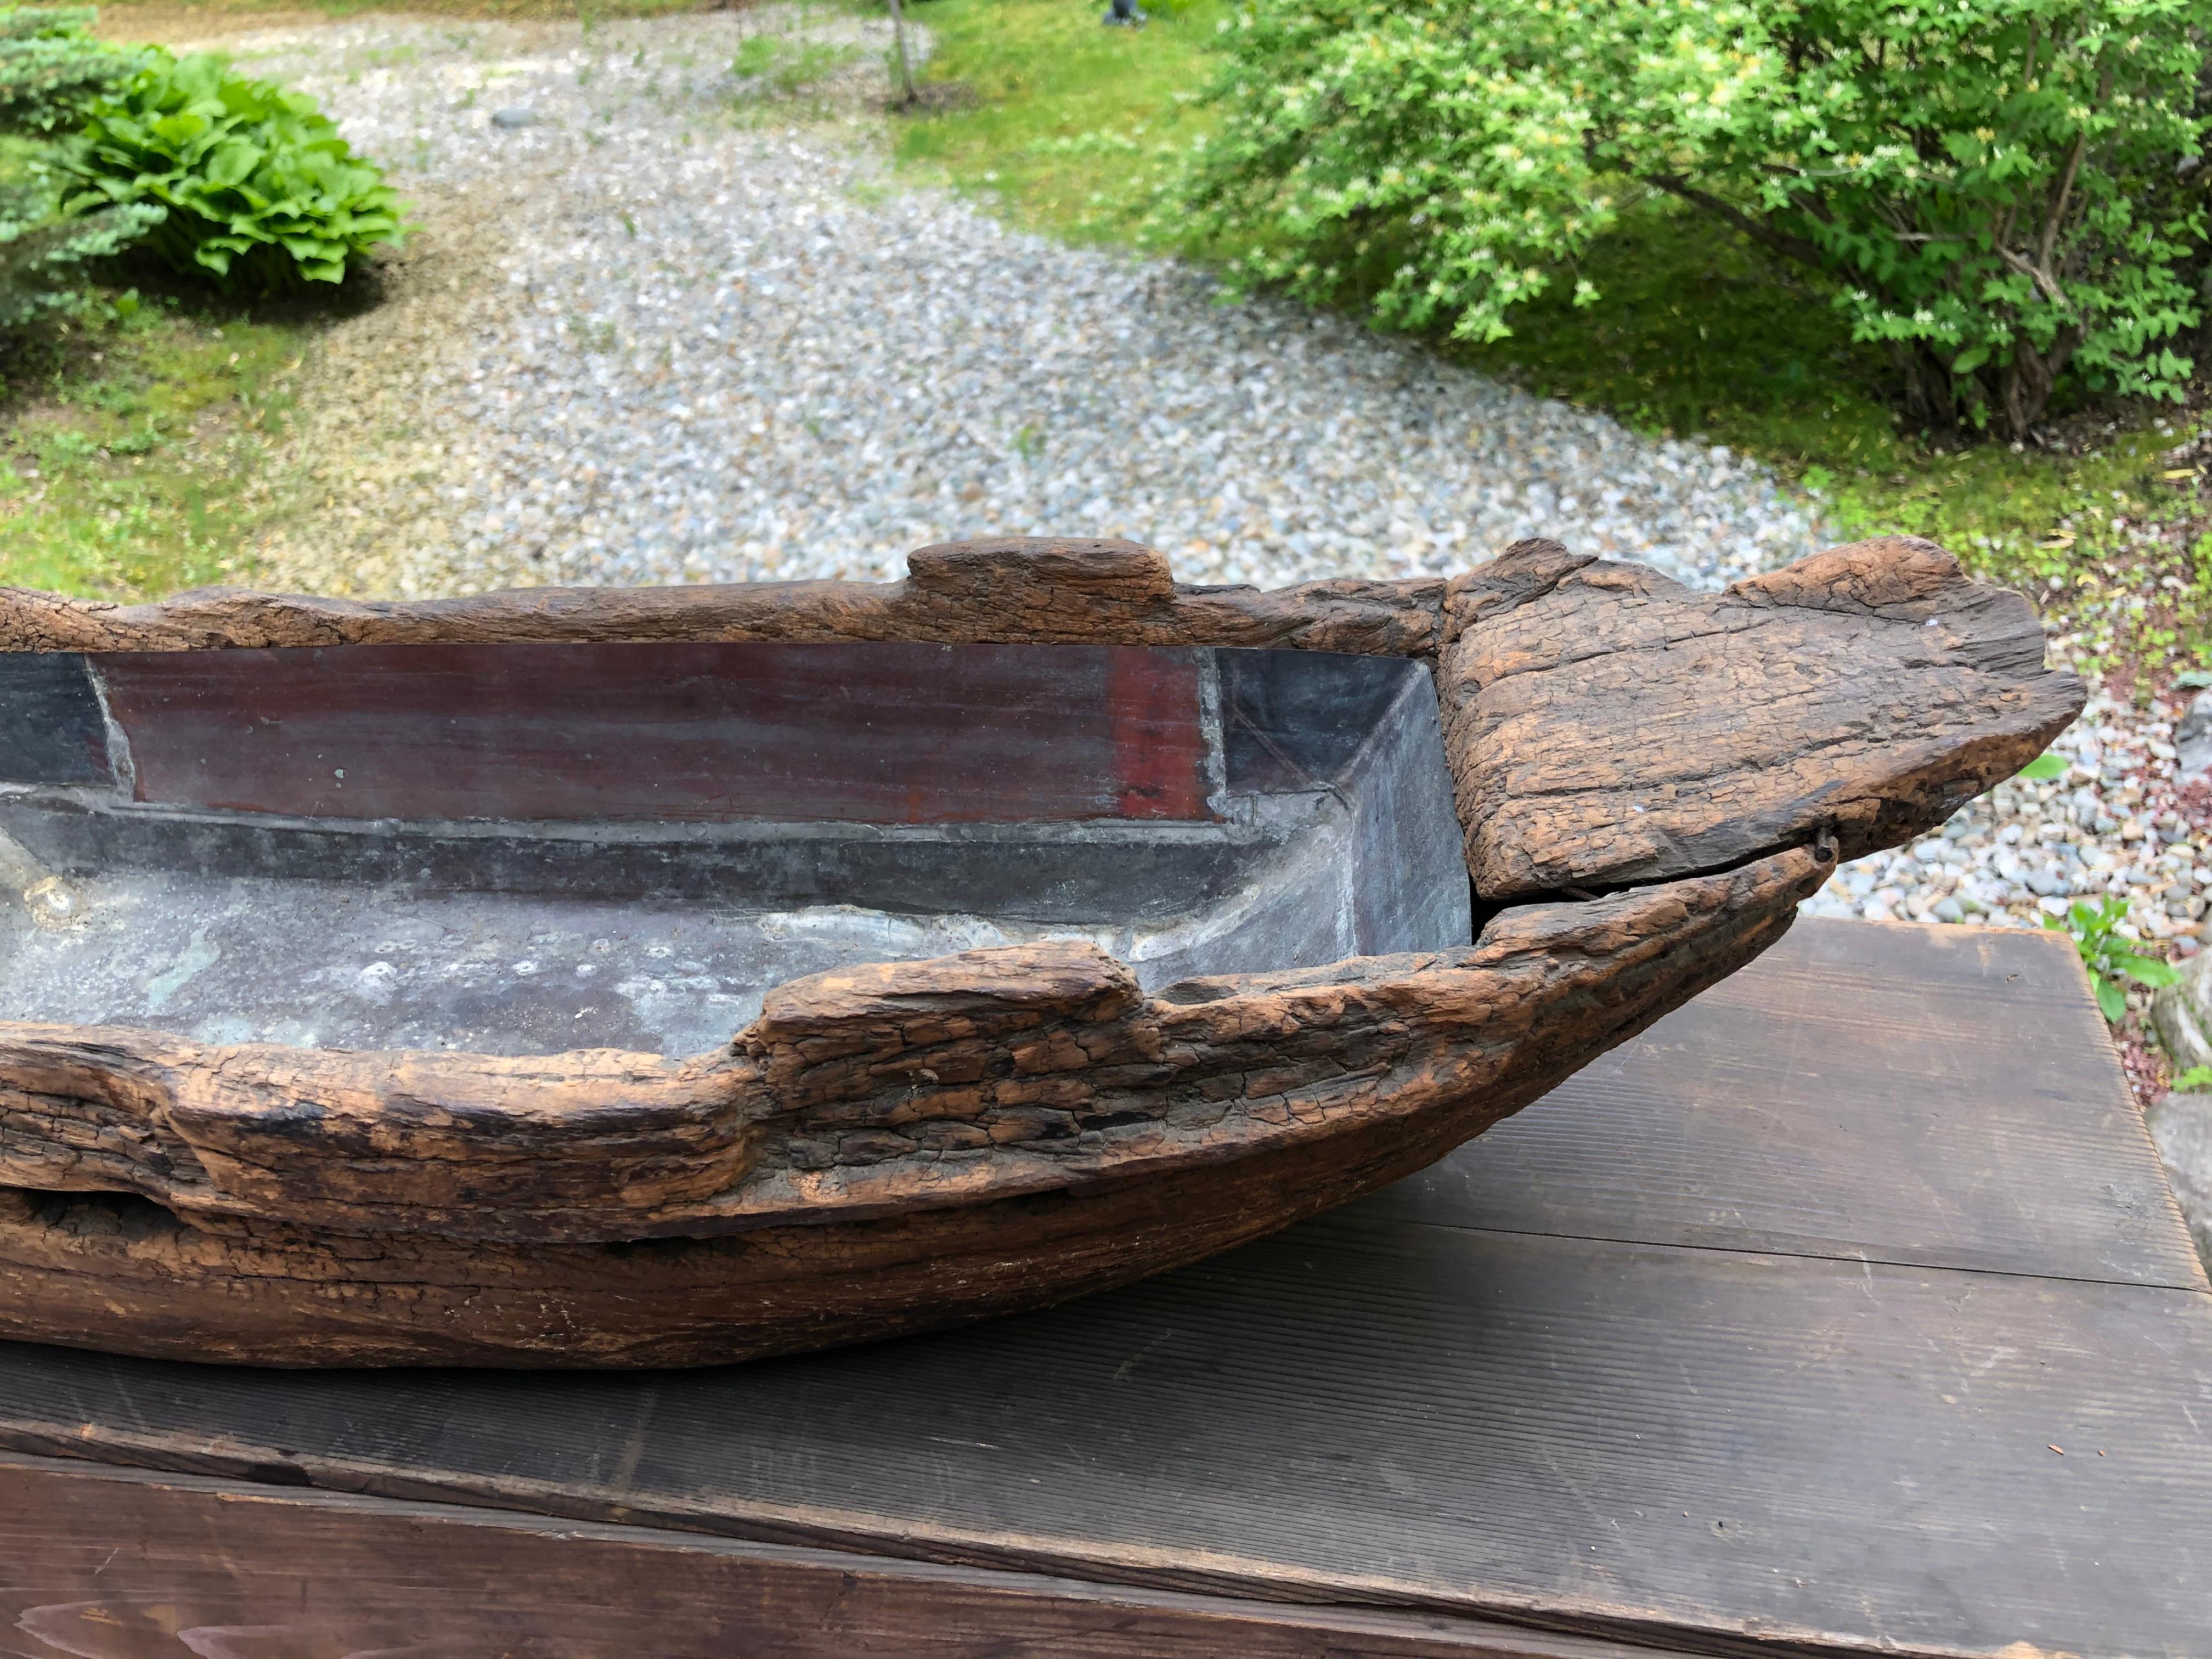 Japanese Big Antique Hand Carved Ikenobu Boat 19th Century, Boxed Hard to Find 7